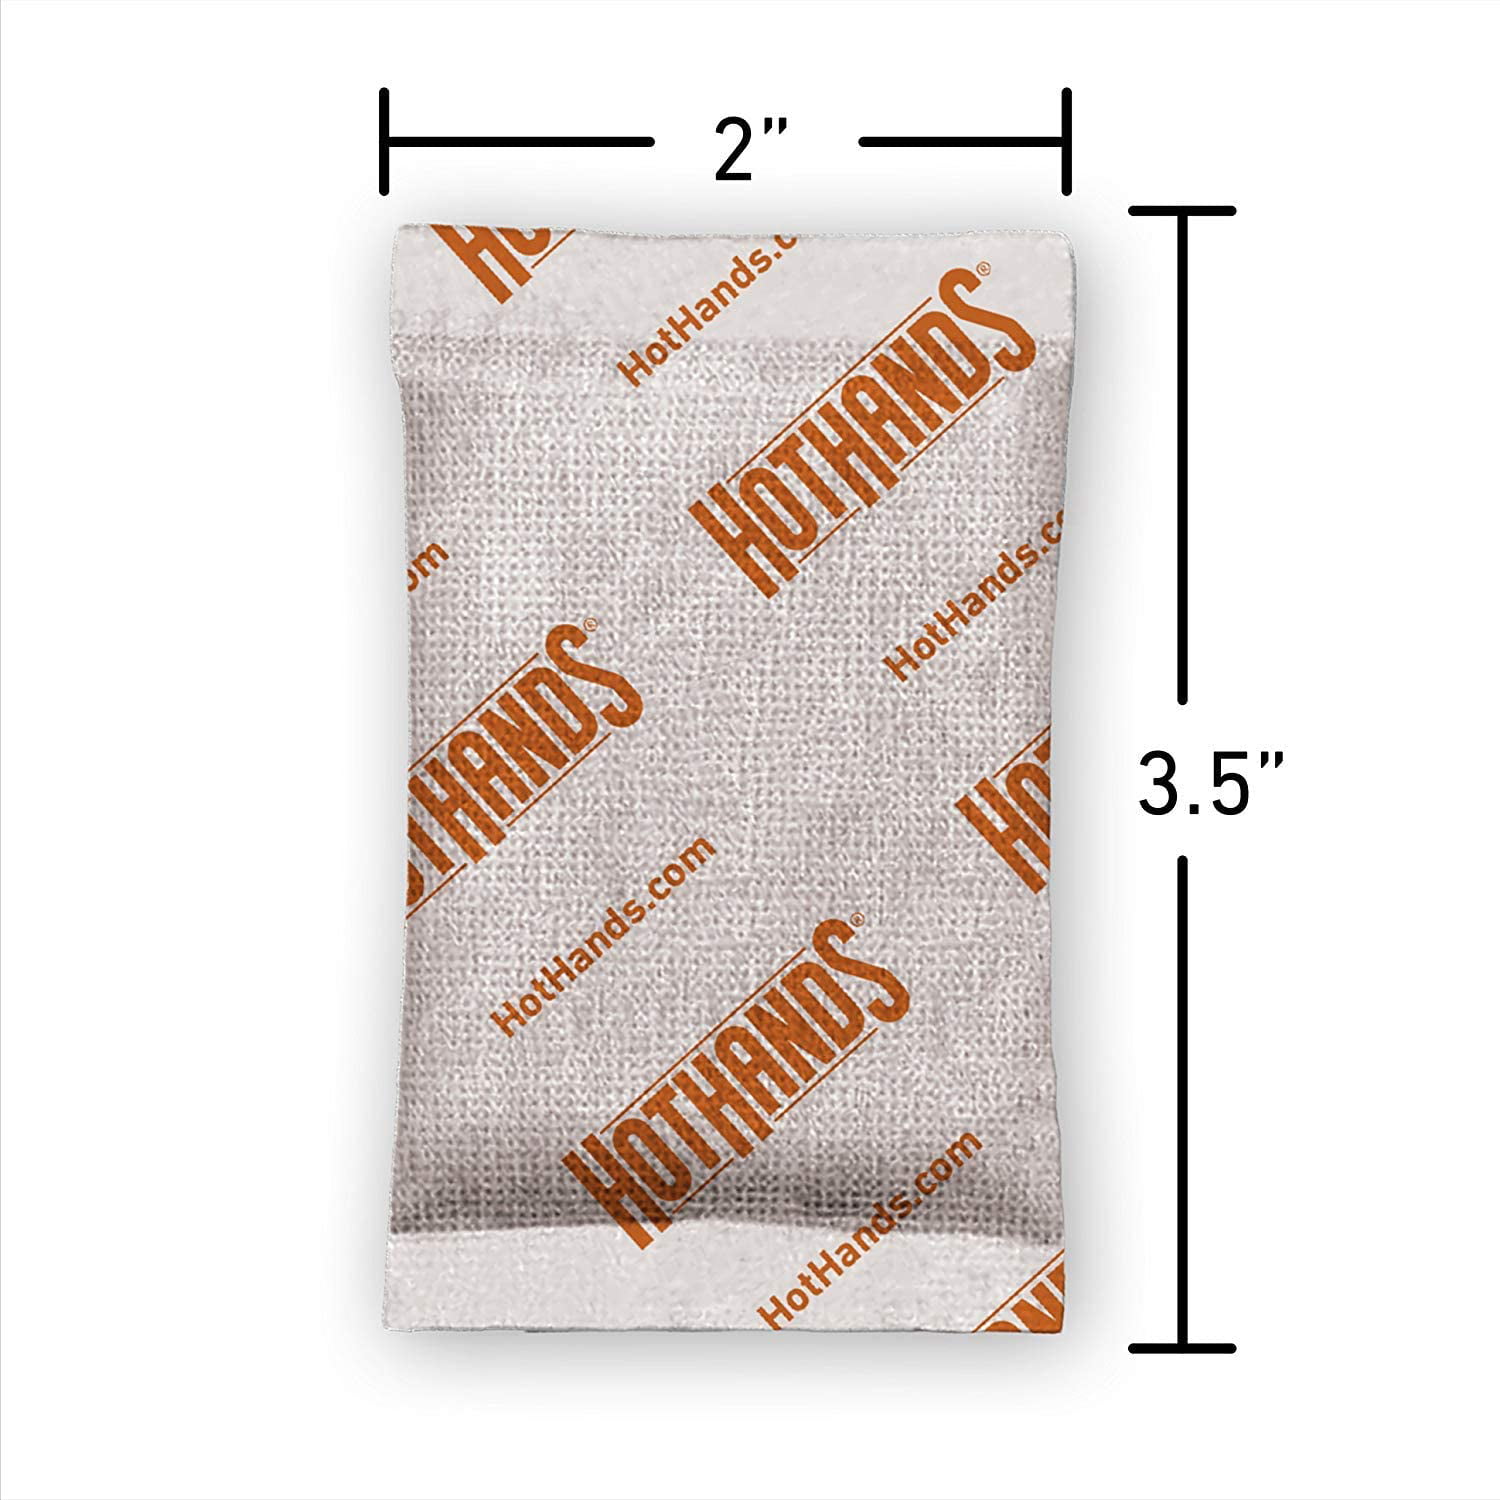 Hothands Air Activated Hand Warmers Up To 10 Hours Of Heat 3 Pairs Each 